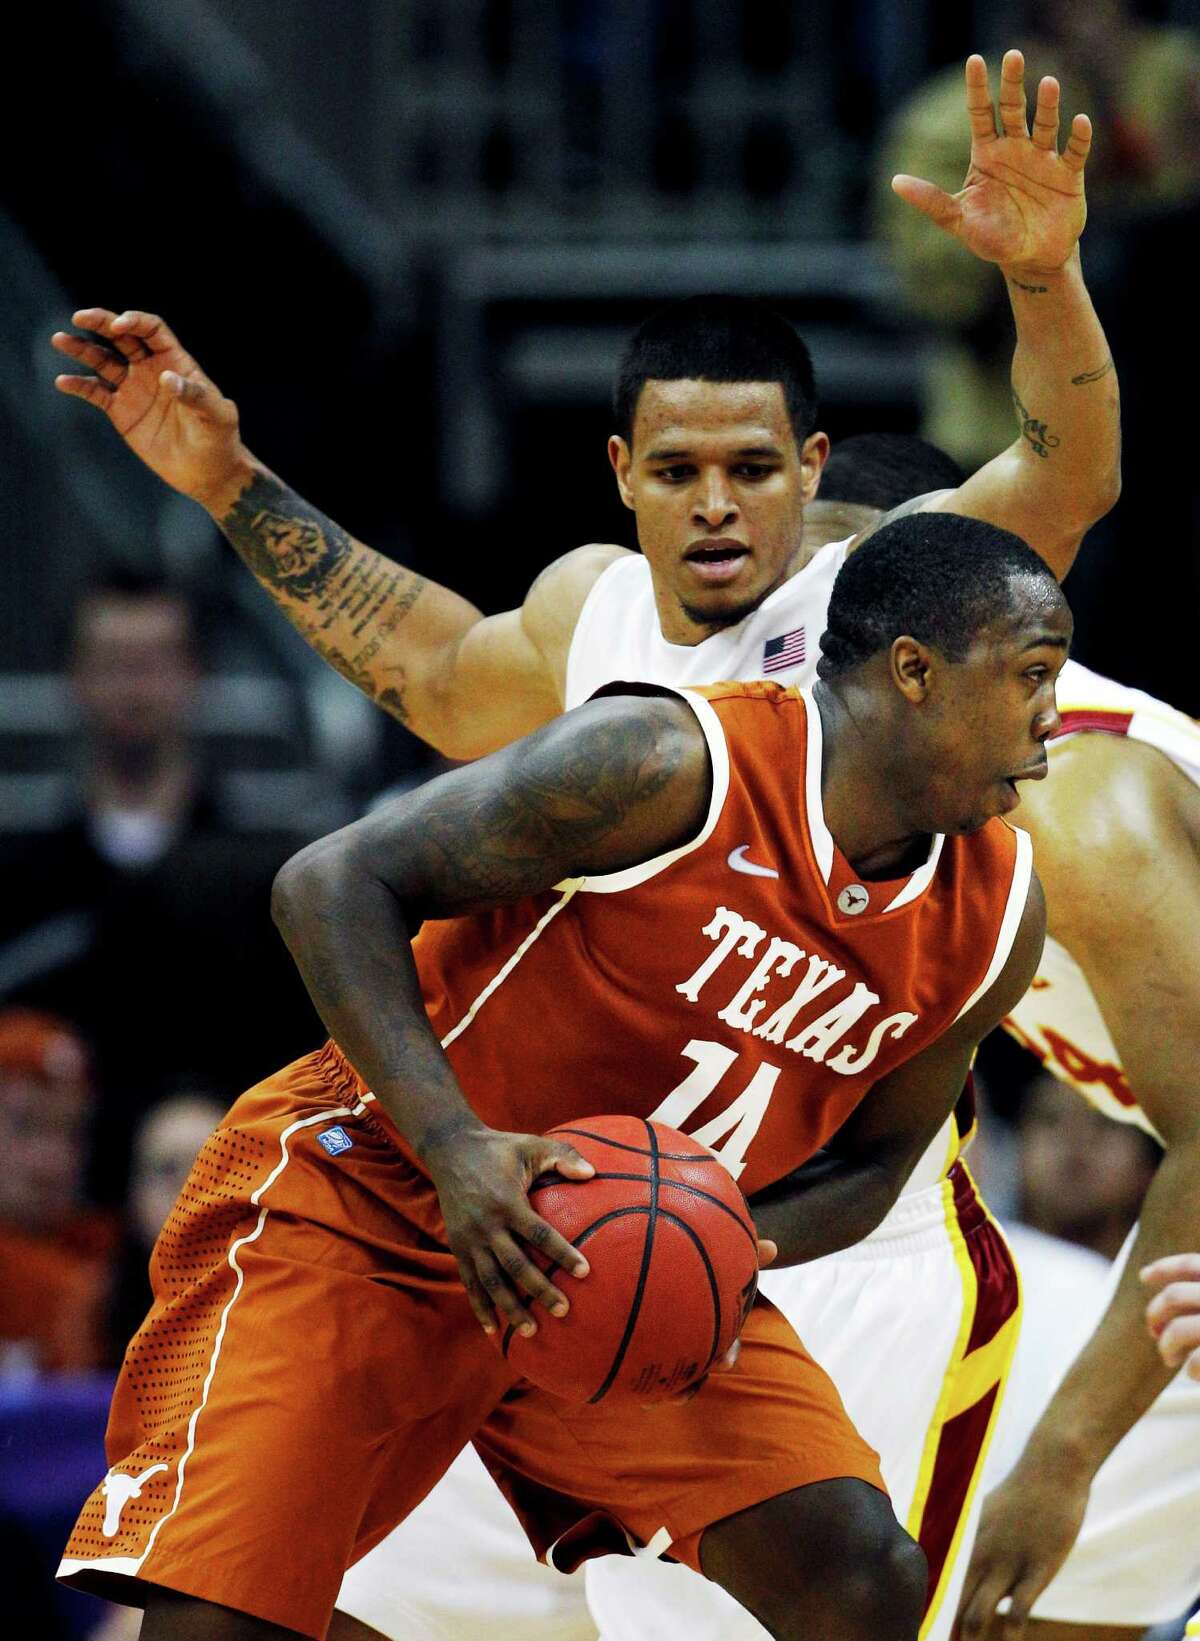 Texas guard J’Covan Brown drives around Iowa State guard Chris Babb during the second half of game in the Big 12 Conference tournament on March 8, 2012, in Kansas City, Mo.